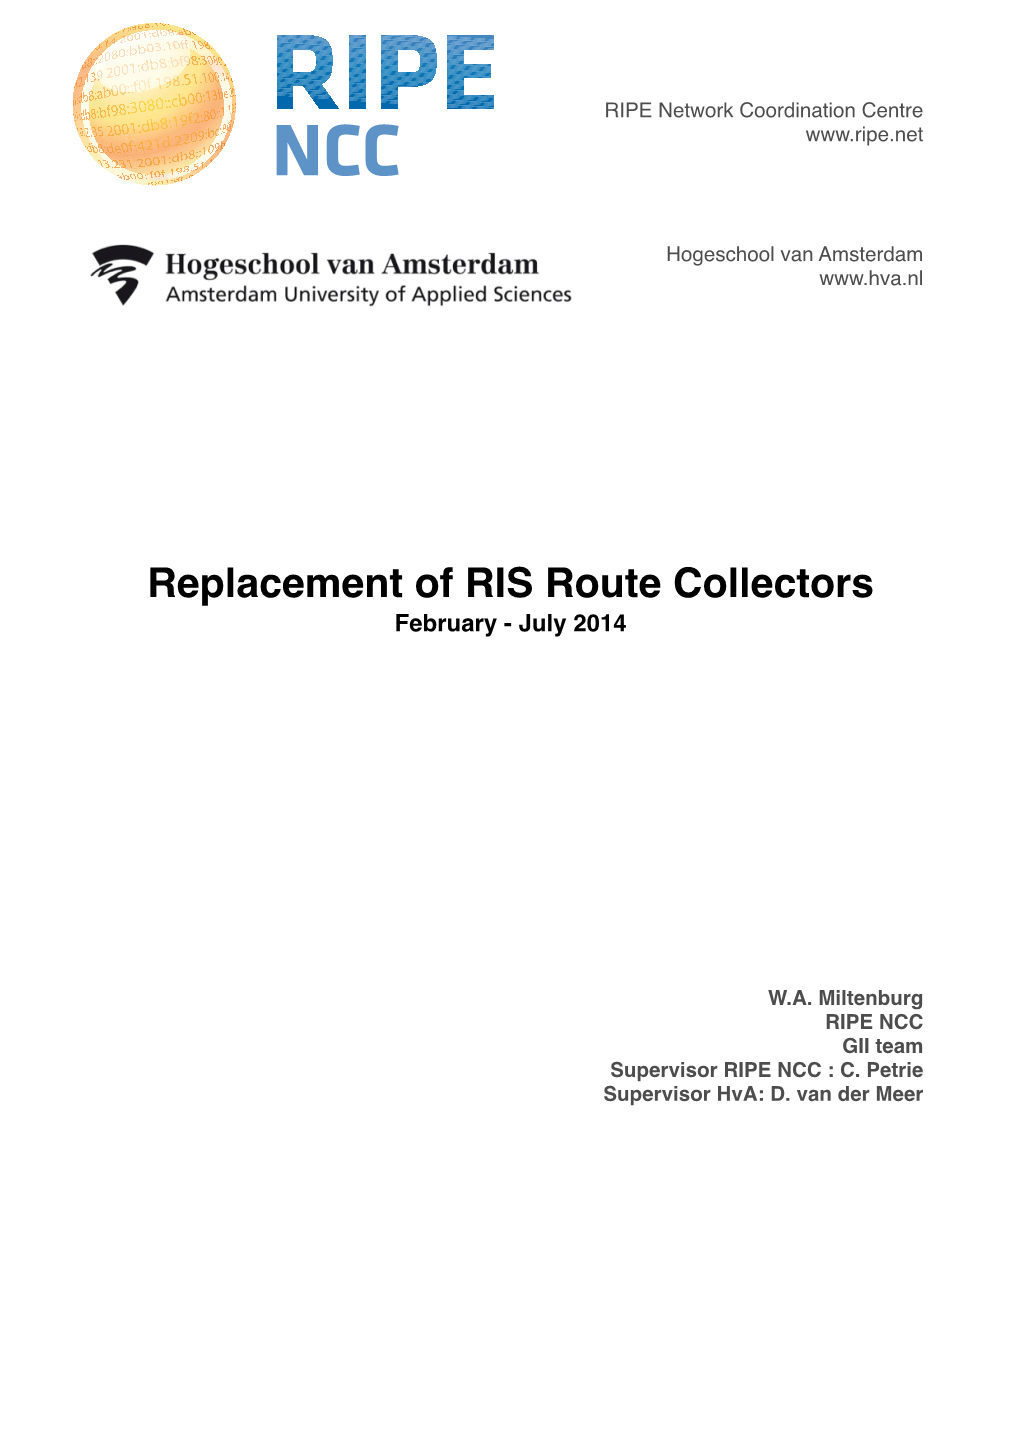 Replacement of RIS Route Collectors February - July 2014